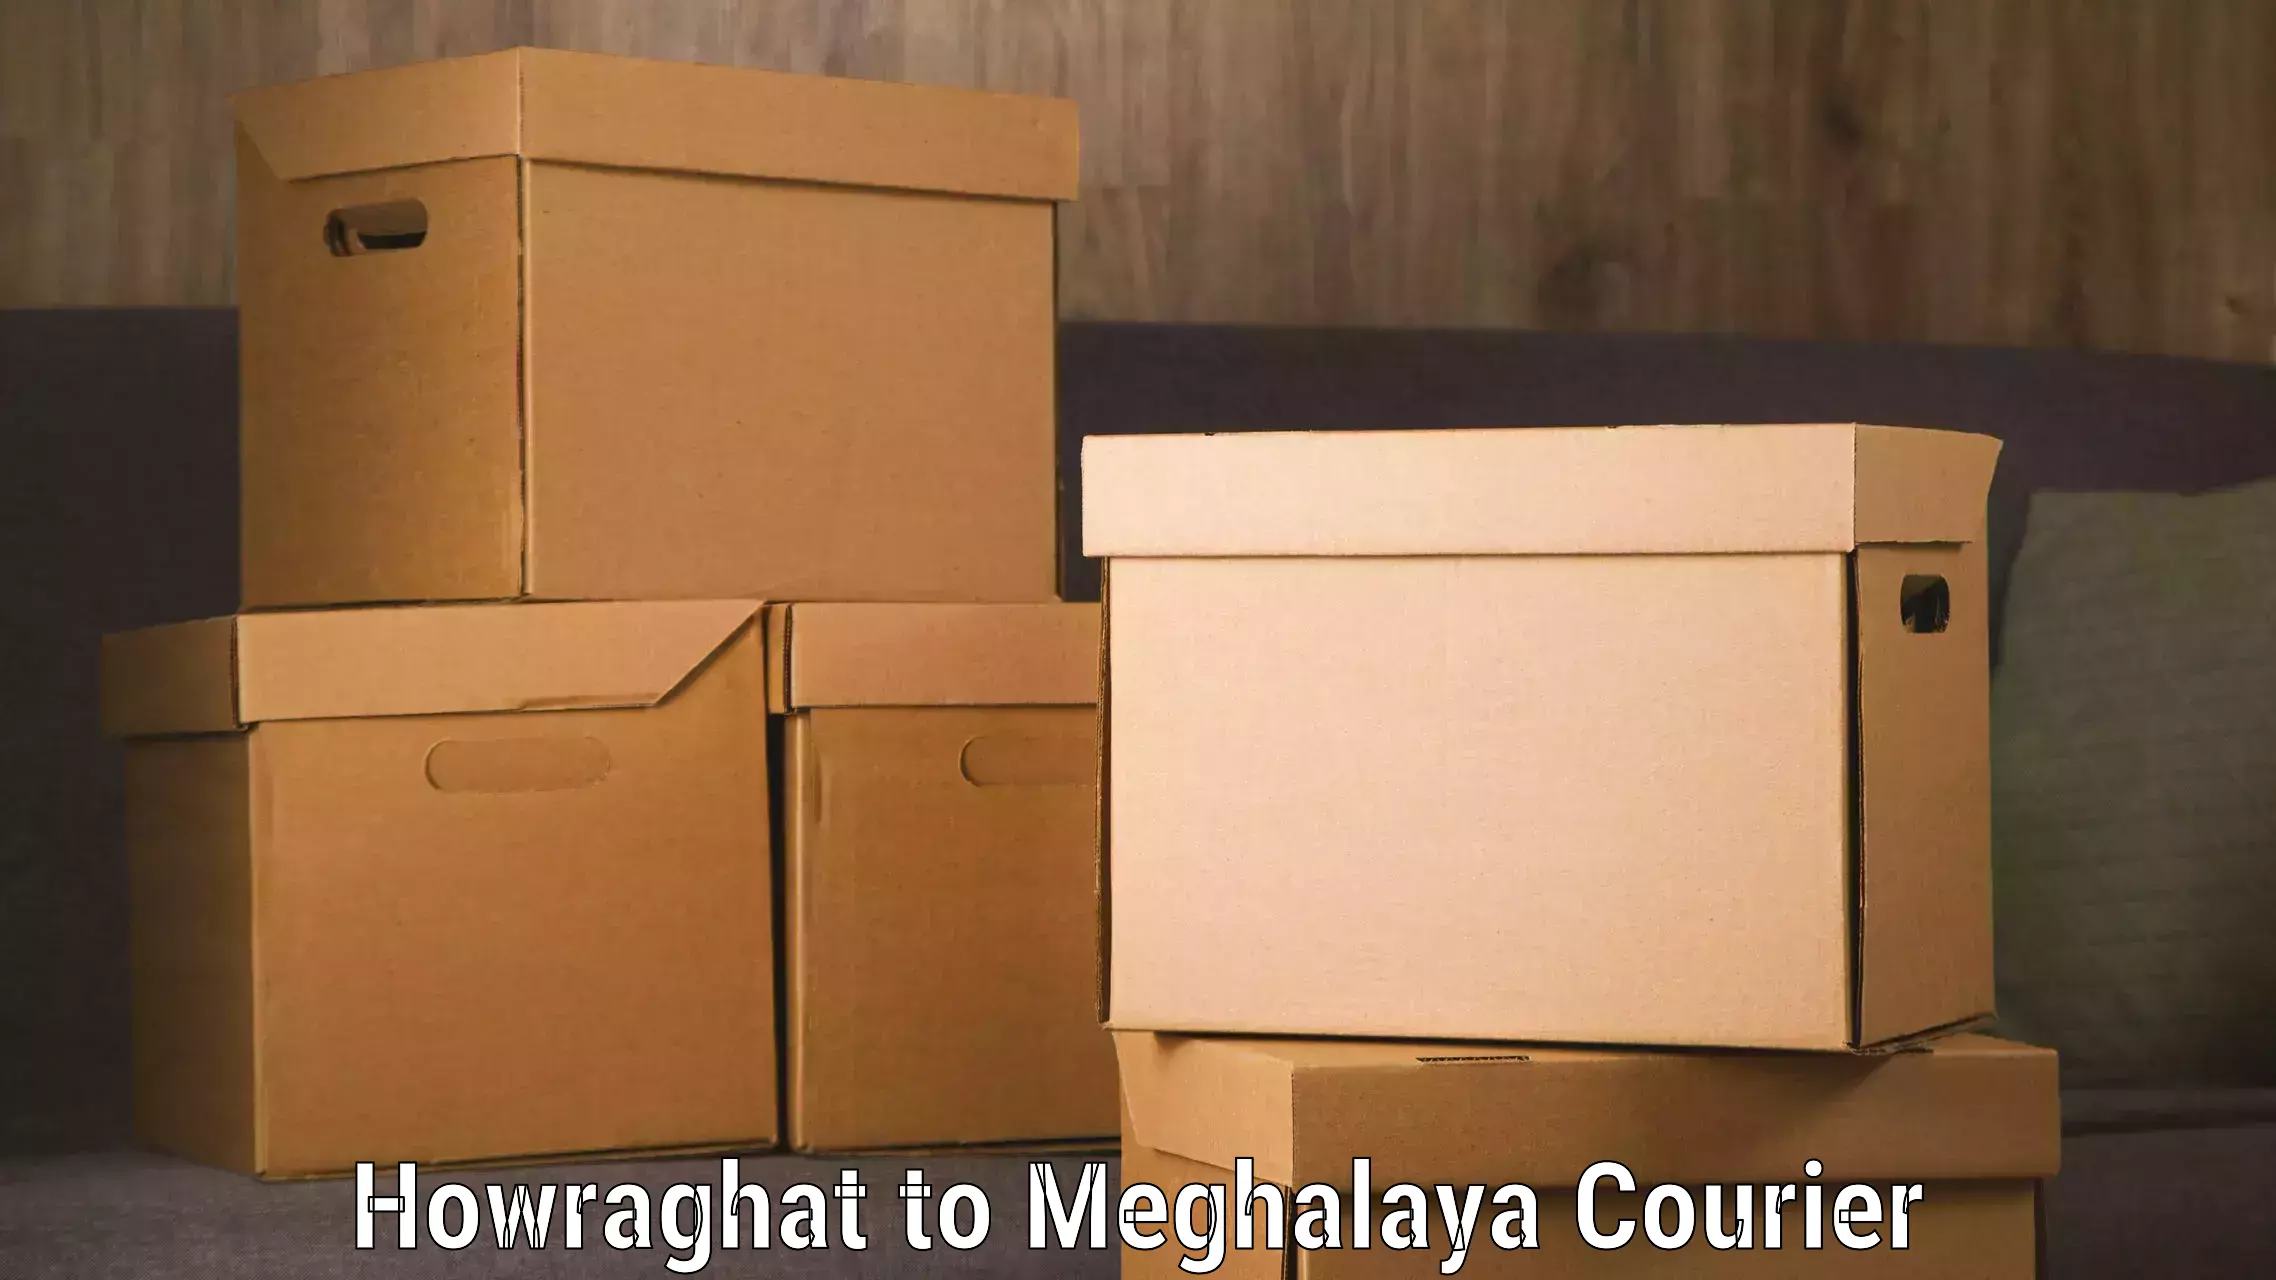 Electronic items luggage shipping in Howraghat to Meghalaya